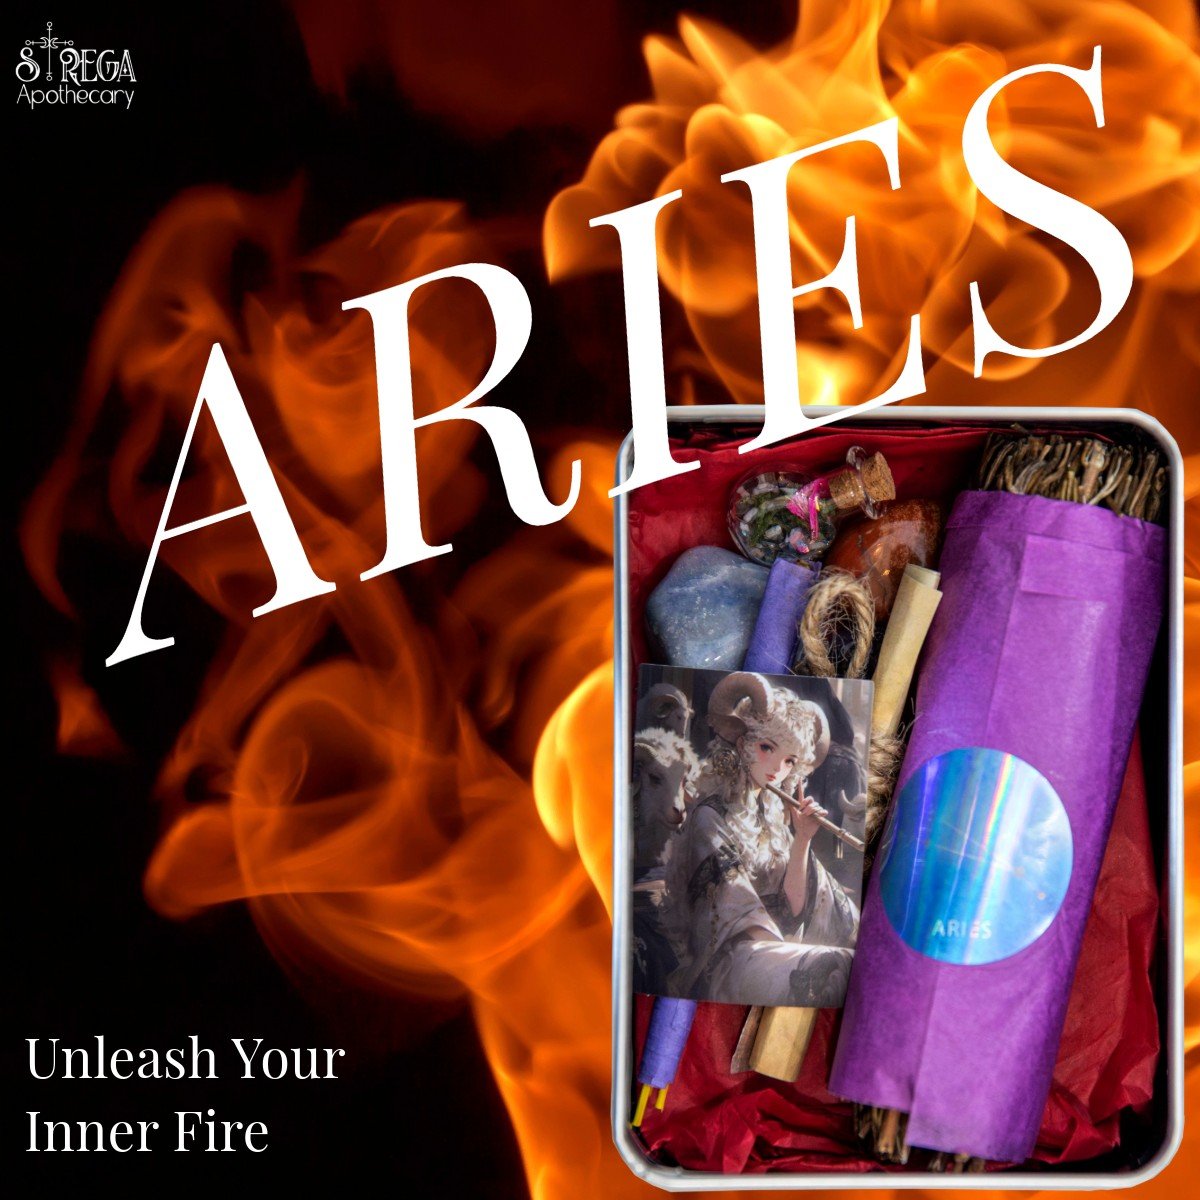 Ignite Your Passion with Our Aries Zodiac Box!  Take charge of your destiny and tap into your innate power and unleash the fire within. 

 #positivity #selfdiscovery #apothecary #aesthetic #stregaapothecary #astrology #bundles #zodiac #strega #centra